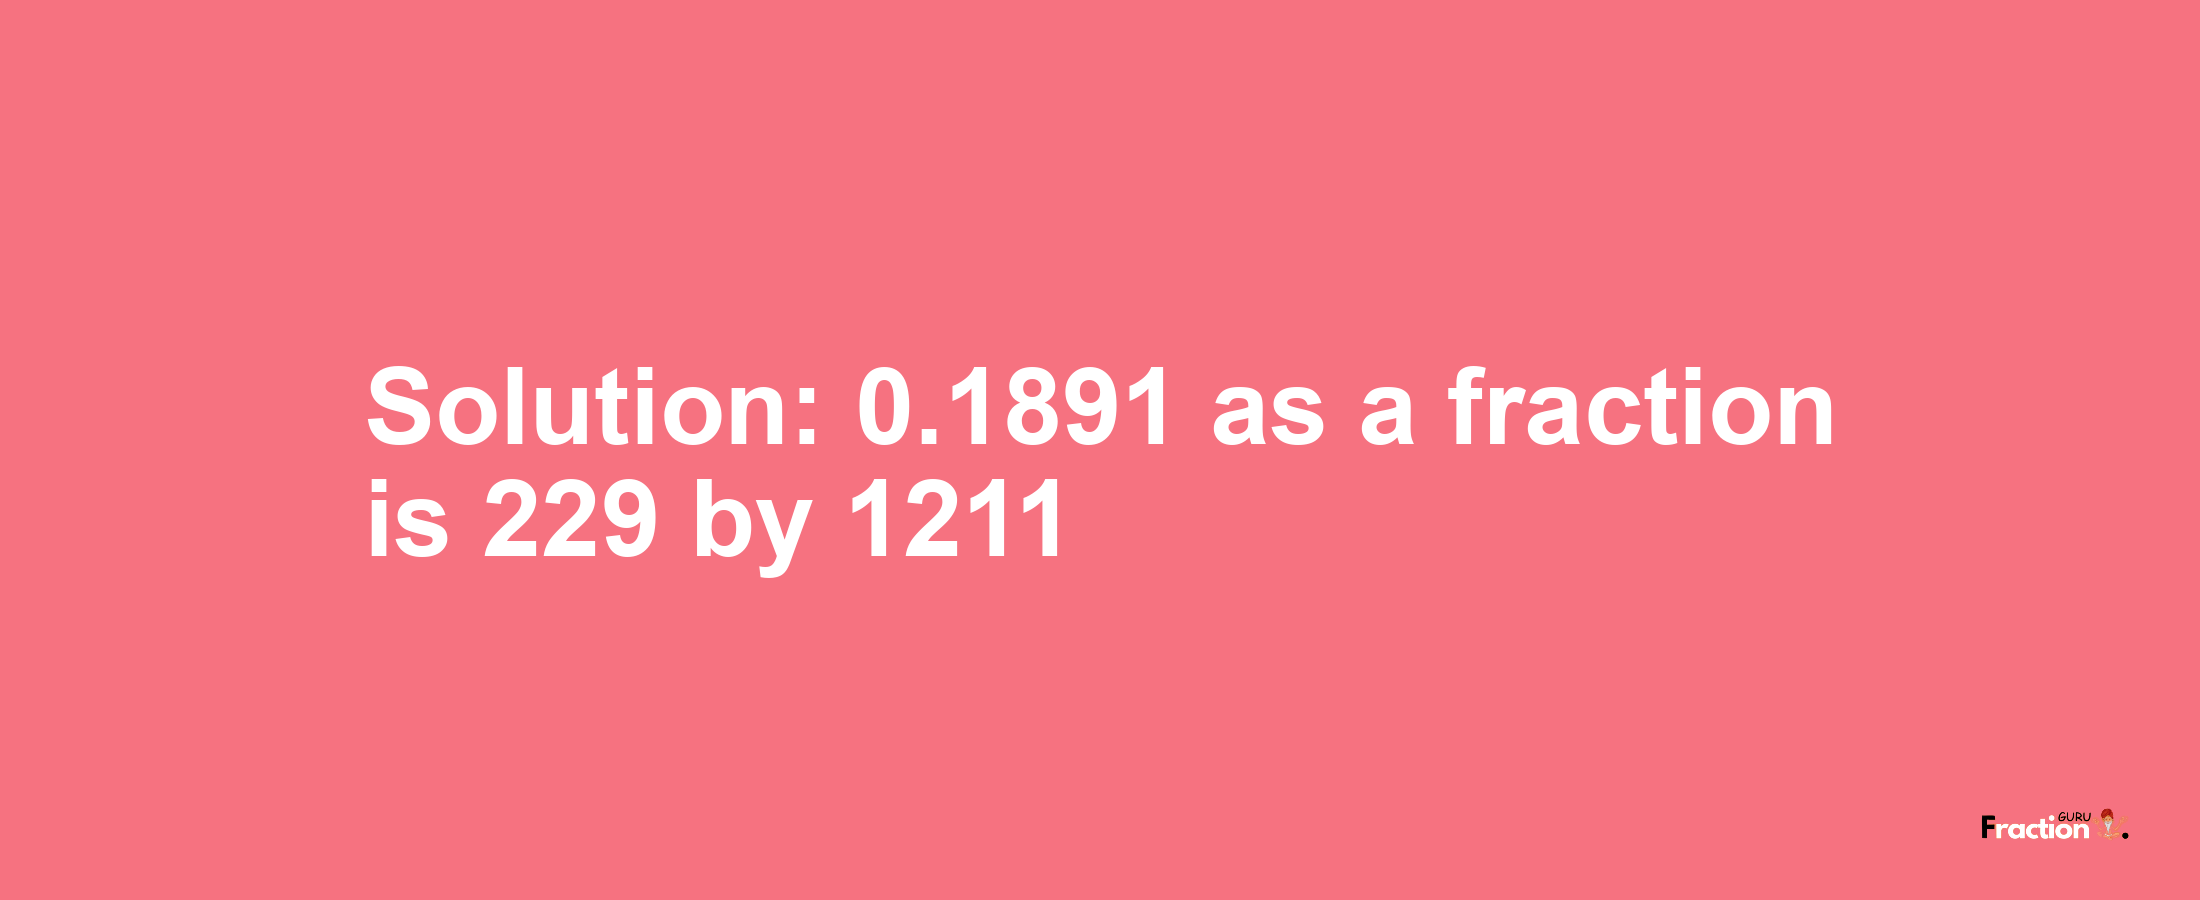 Solution:0.1891 as a fraction is 229/1211